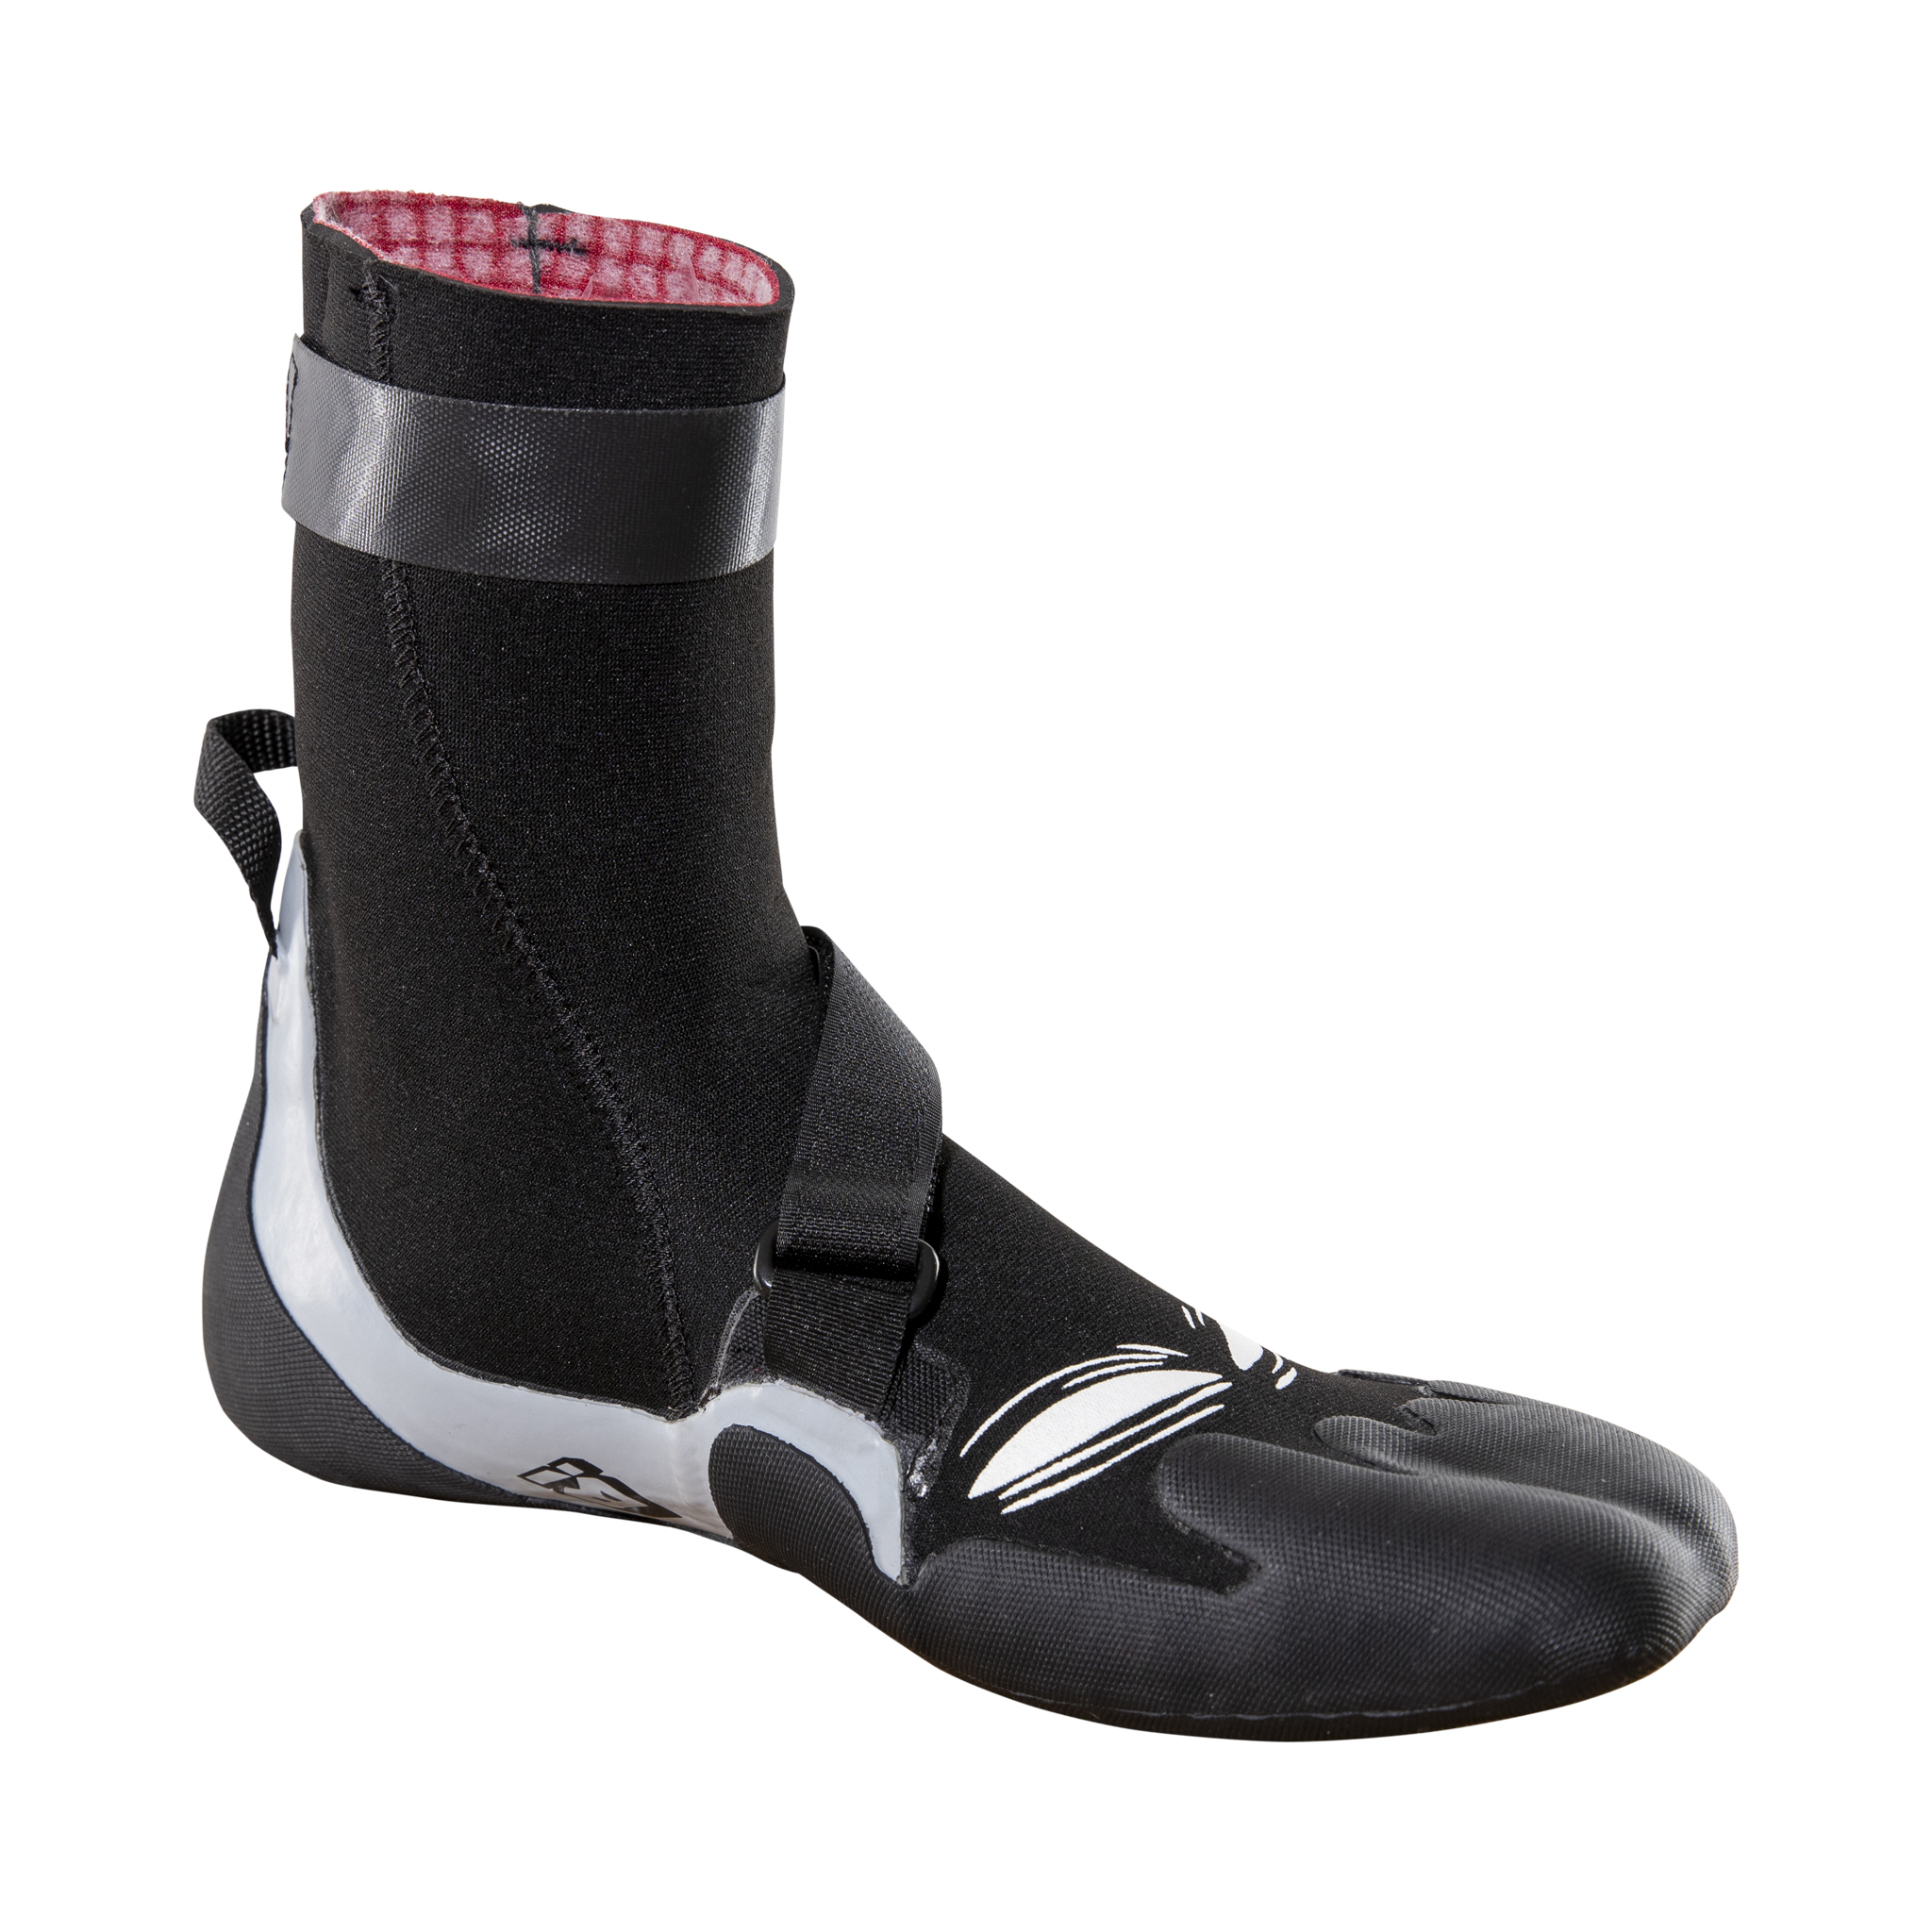 Split Toe Wetsuit Surfing Boots, FREE UK Delivery